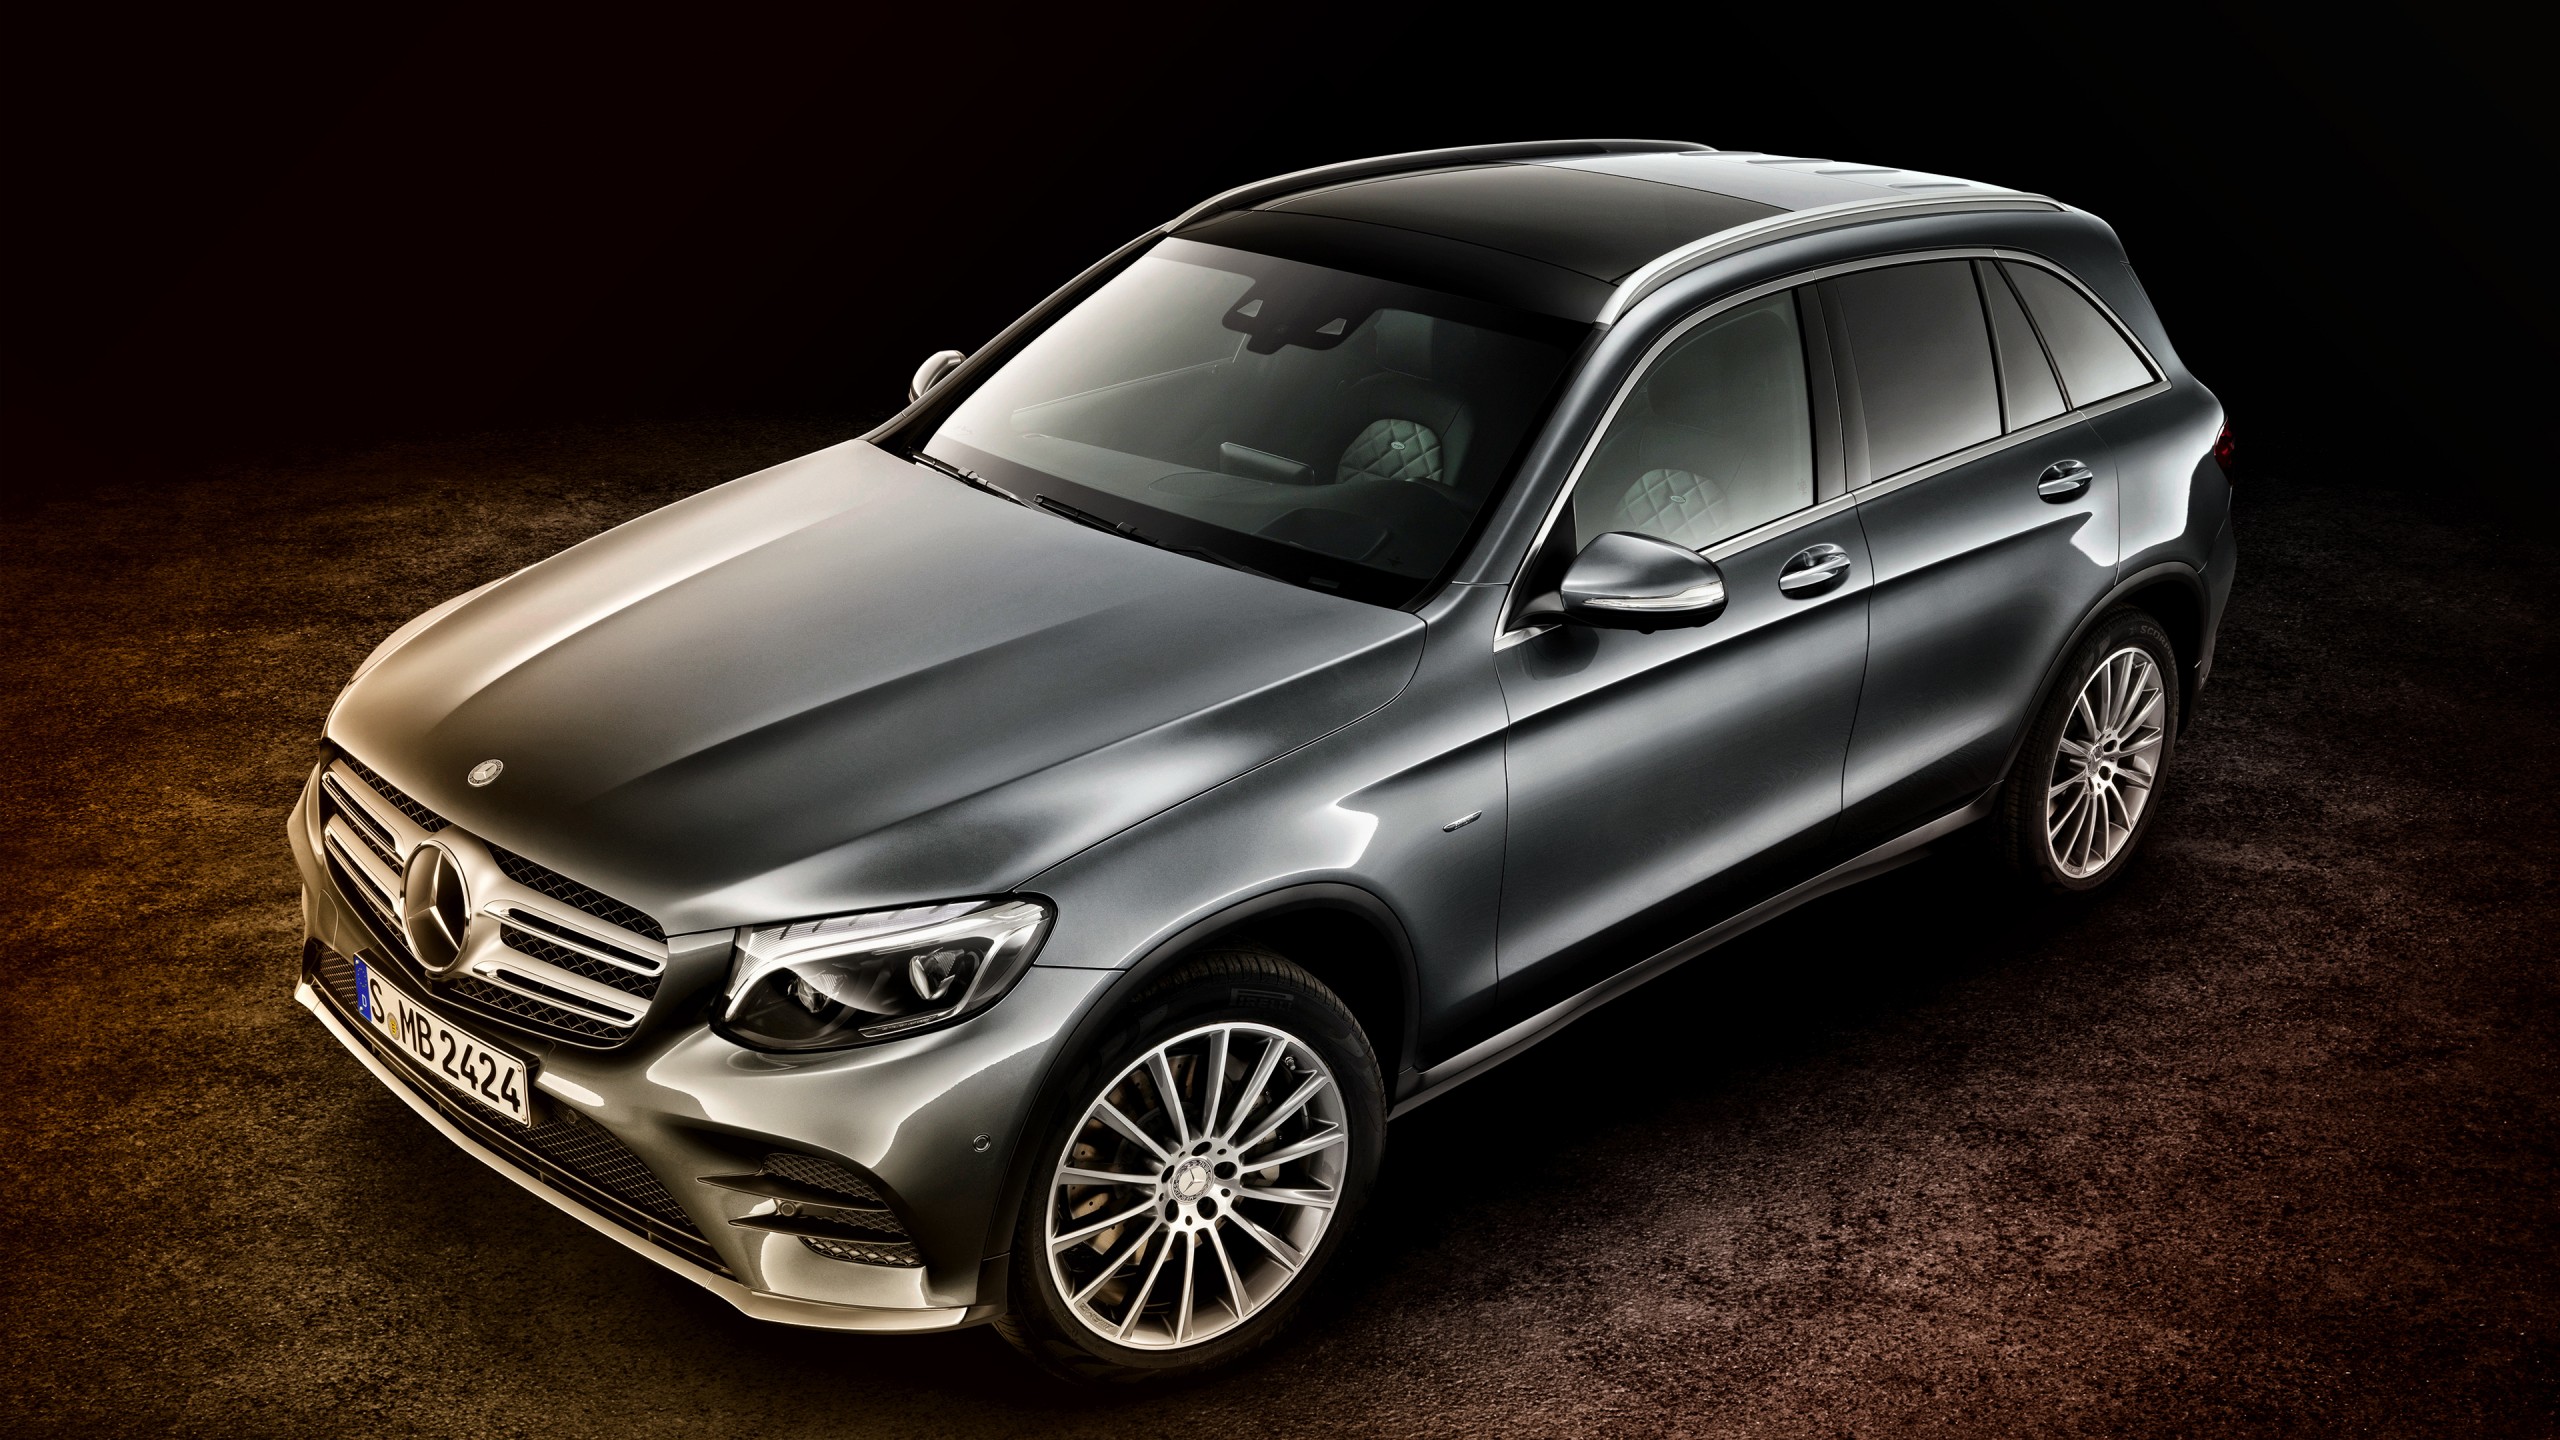 mercedes benz wallpaper for android,land vehicle,vehicle,car,luxury vehicle,automotive design